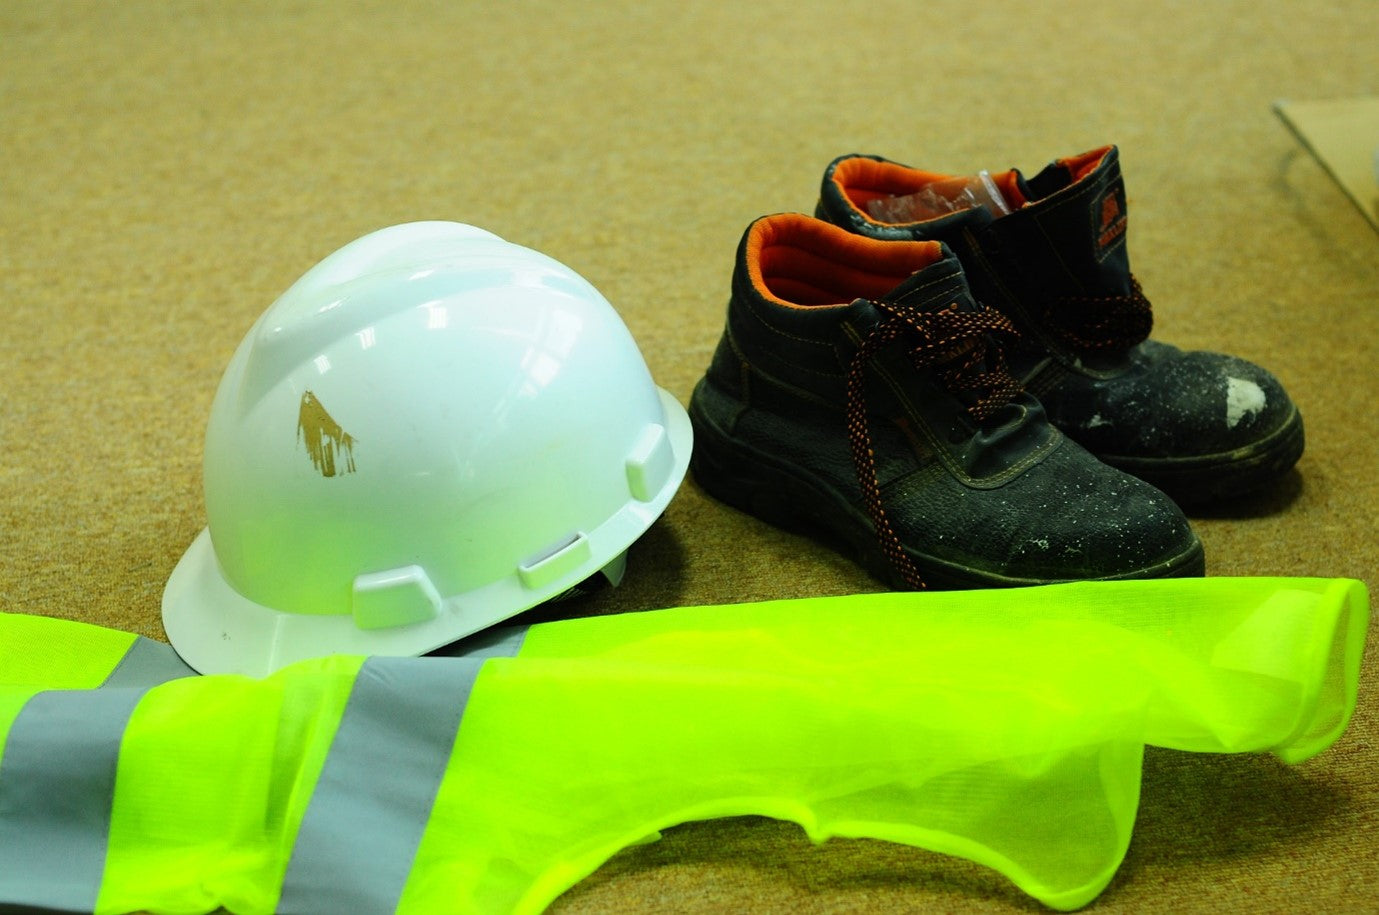 Could rules be changed on agency workers’ PPE?